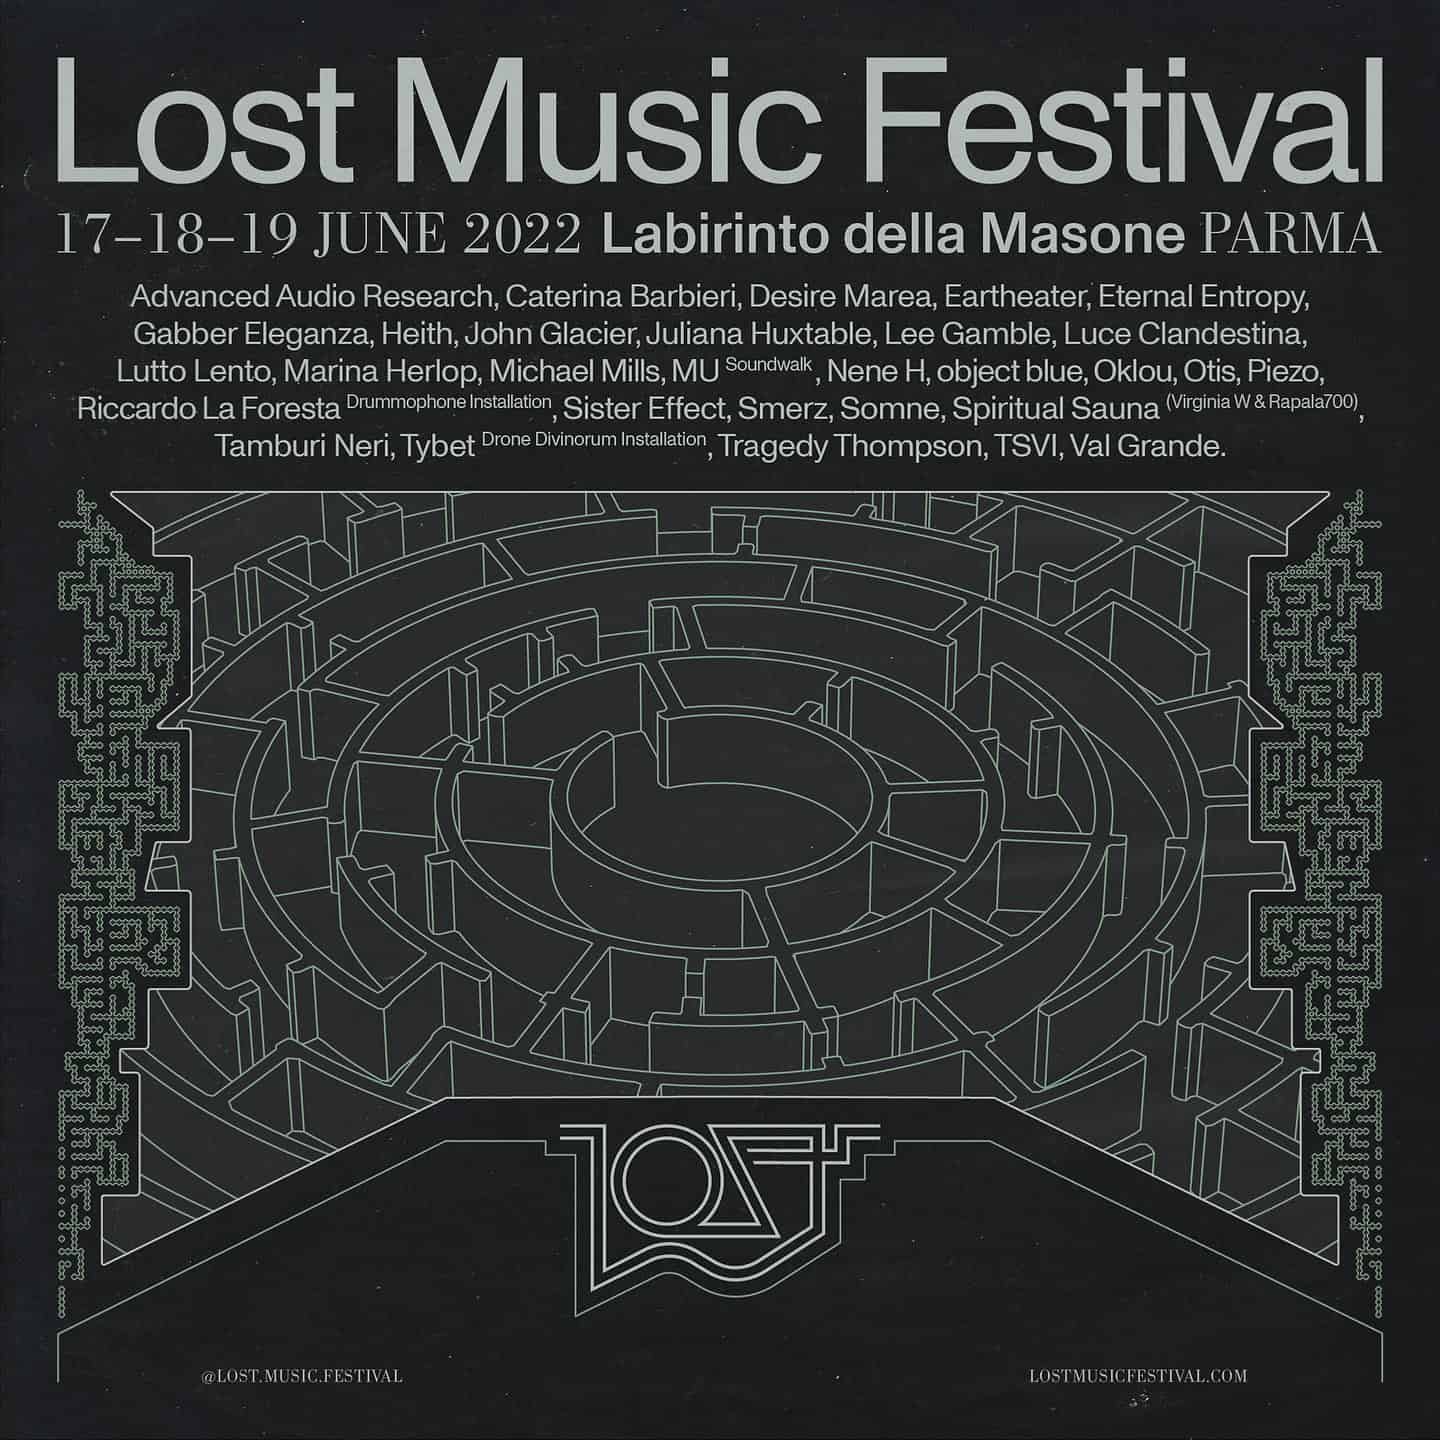 Lost Music Festival 2022 - Lineup